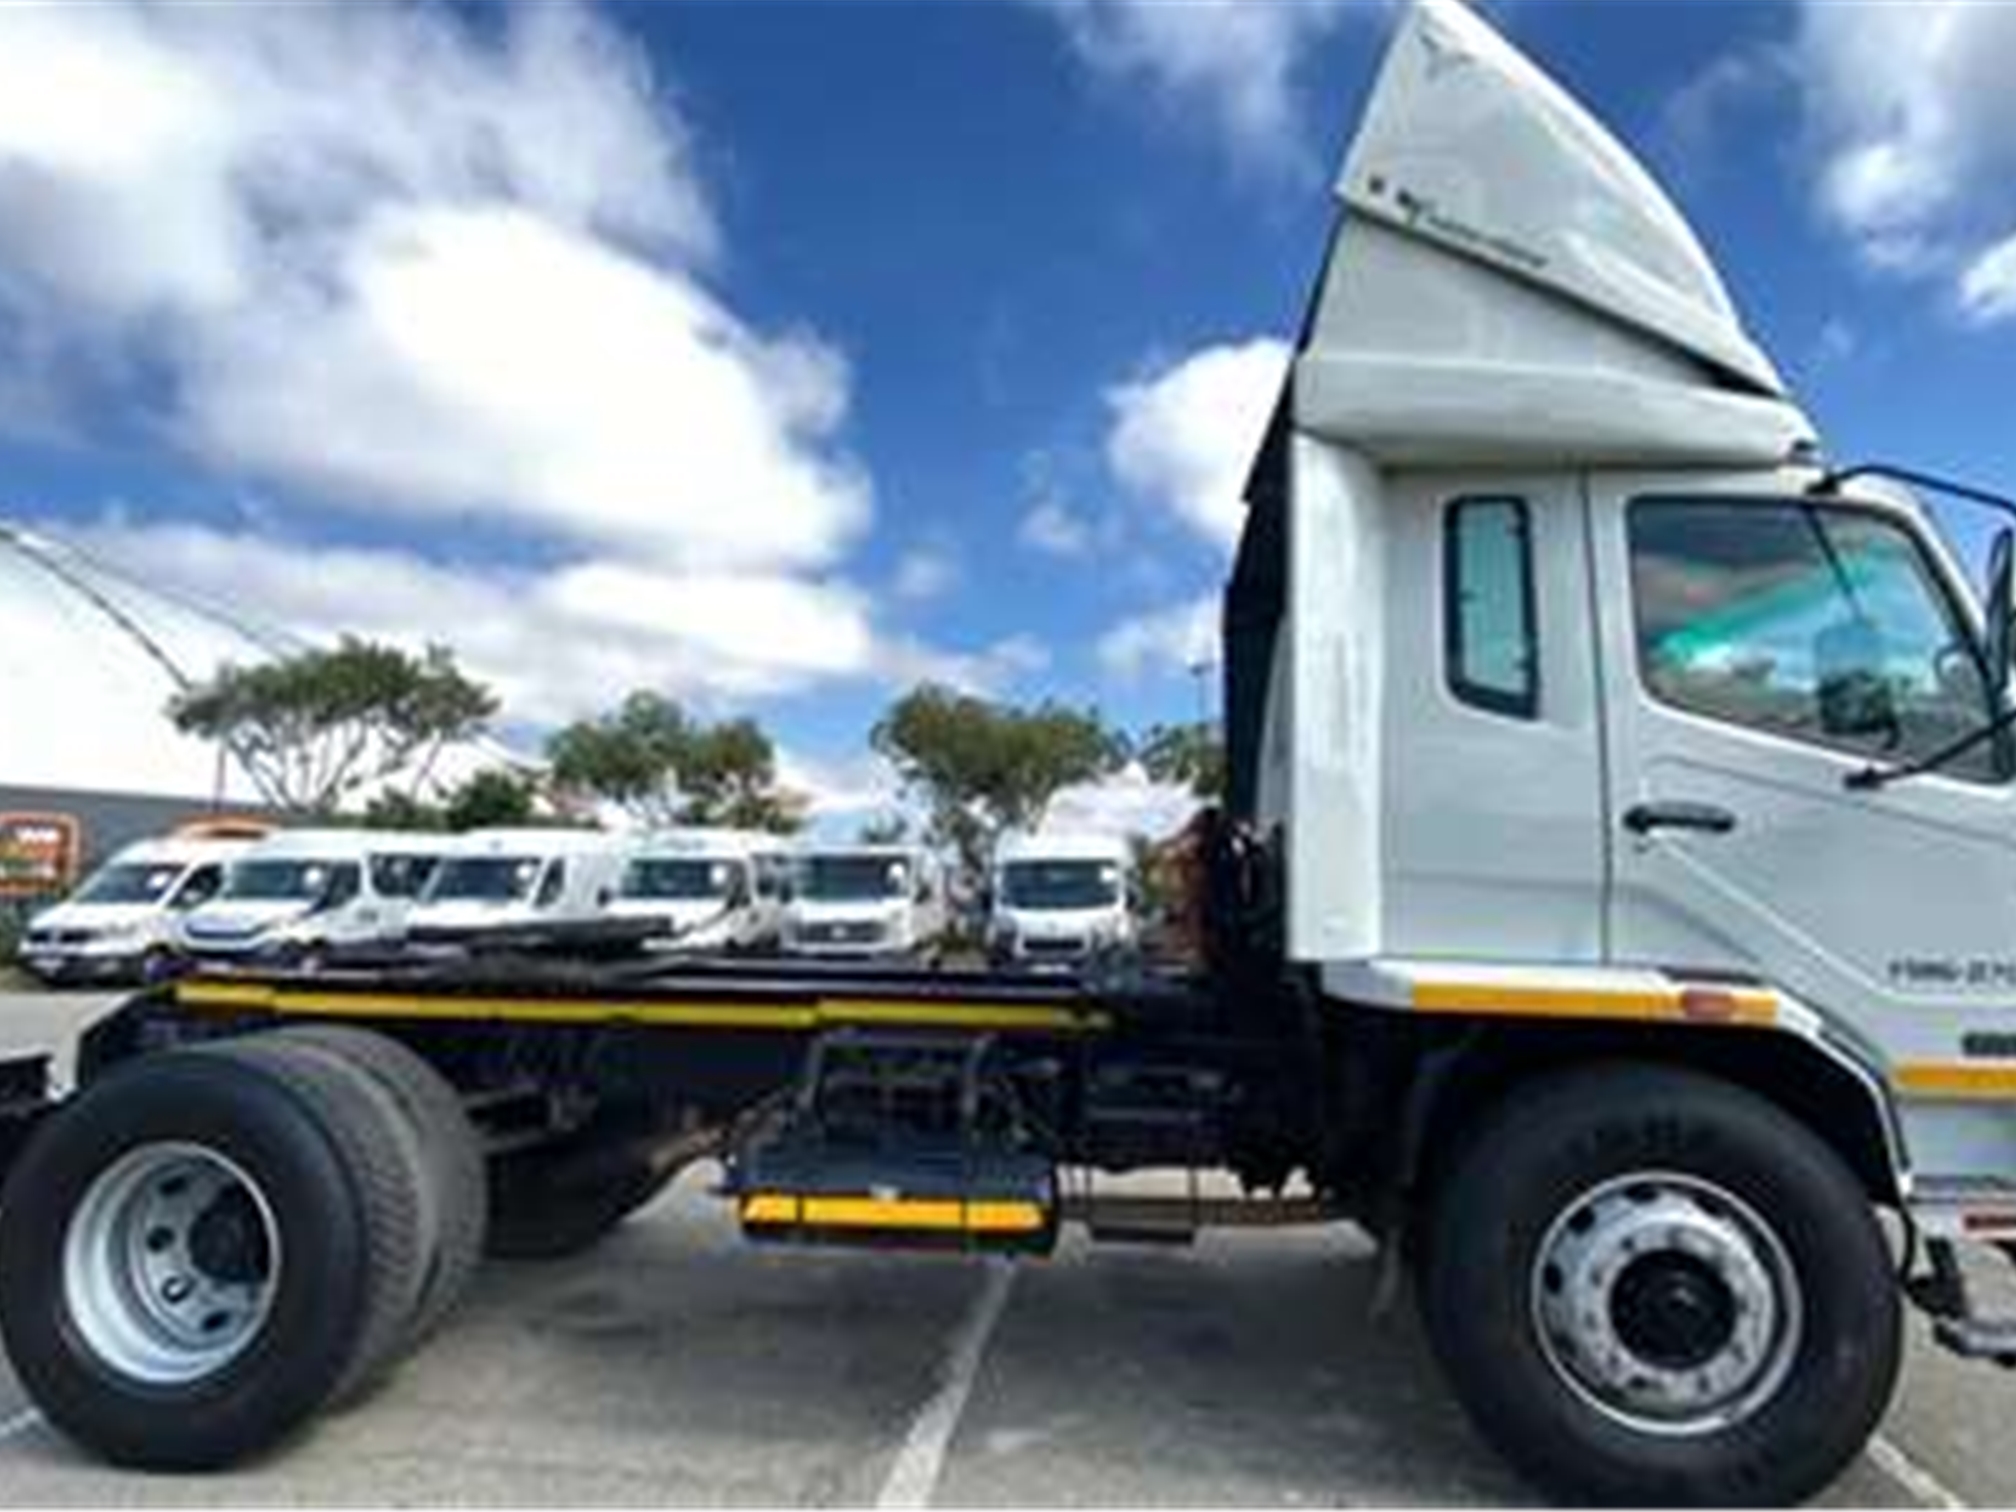 Fuso Truck F Series Fm16 270 2019 for sale by We Buy Cars Dome | Truck & Trailer Marketplace